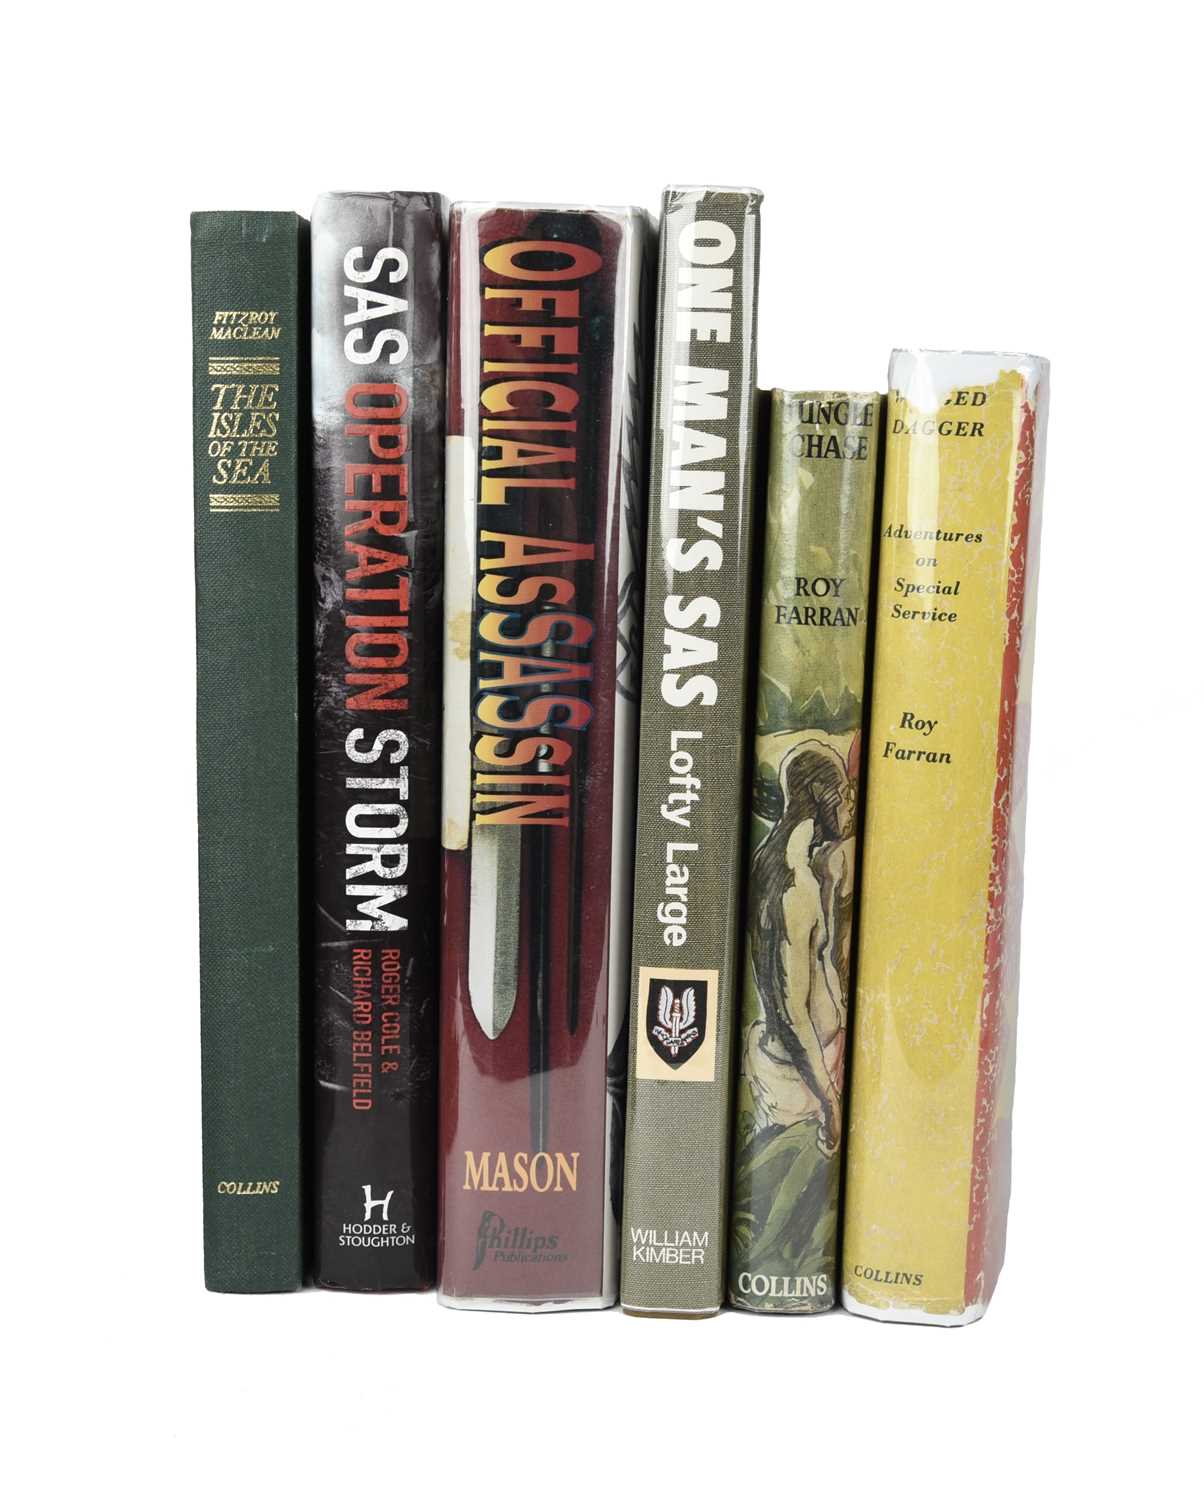 SOE and SAS interest: a collection of books (6) autographed and (mainly) authored by veterans of the